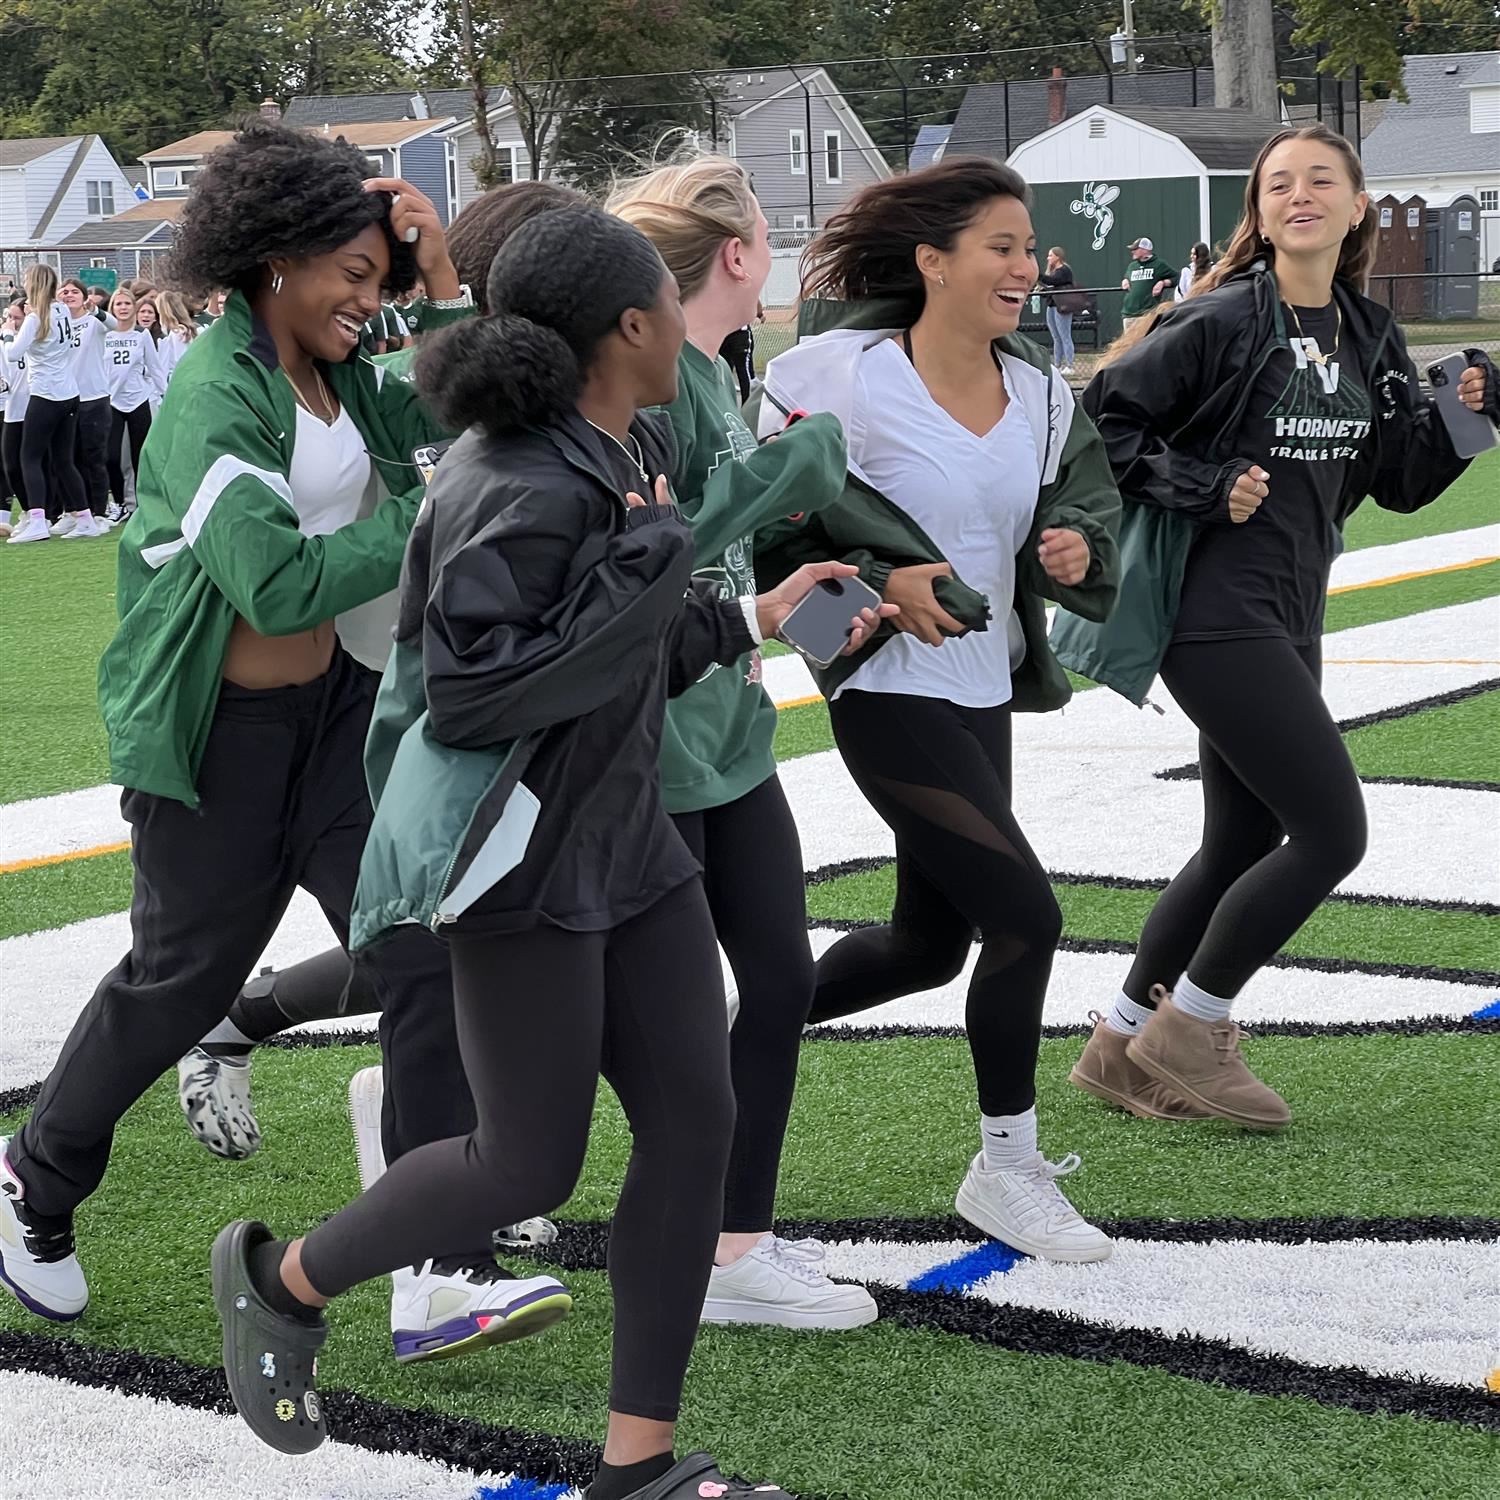  Girls Soccer running out onto the new turf field; photo credit: Rae Allex